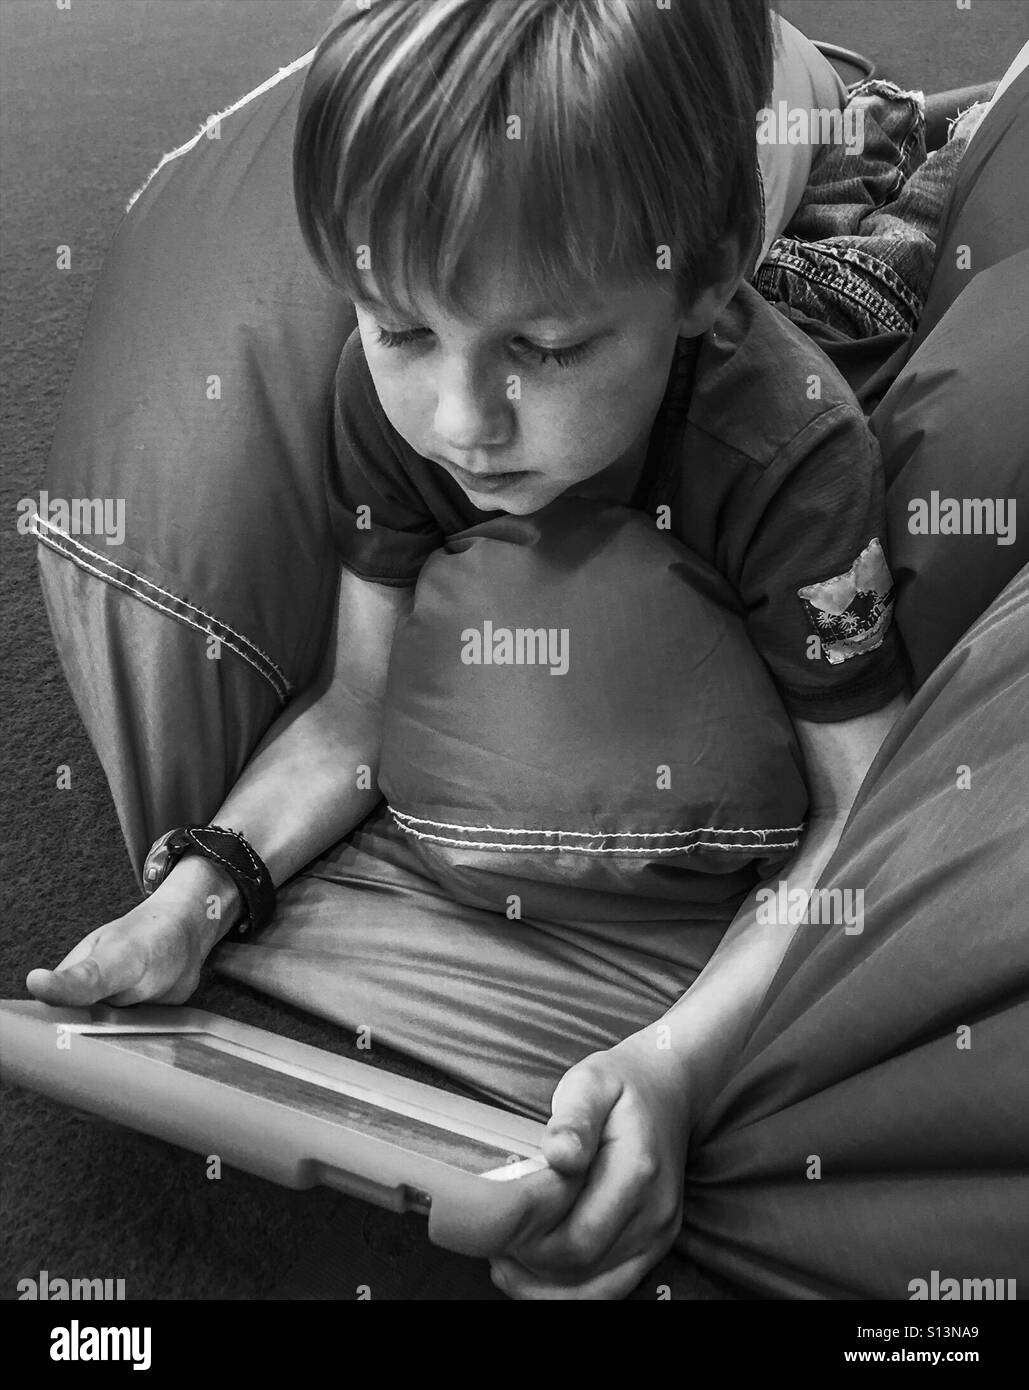 A boy lying on his stomach plays on a tablet. Stock Photo